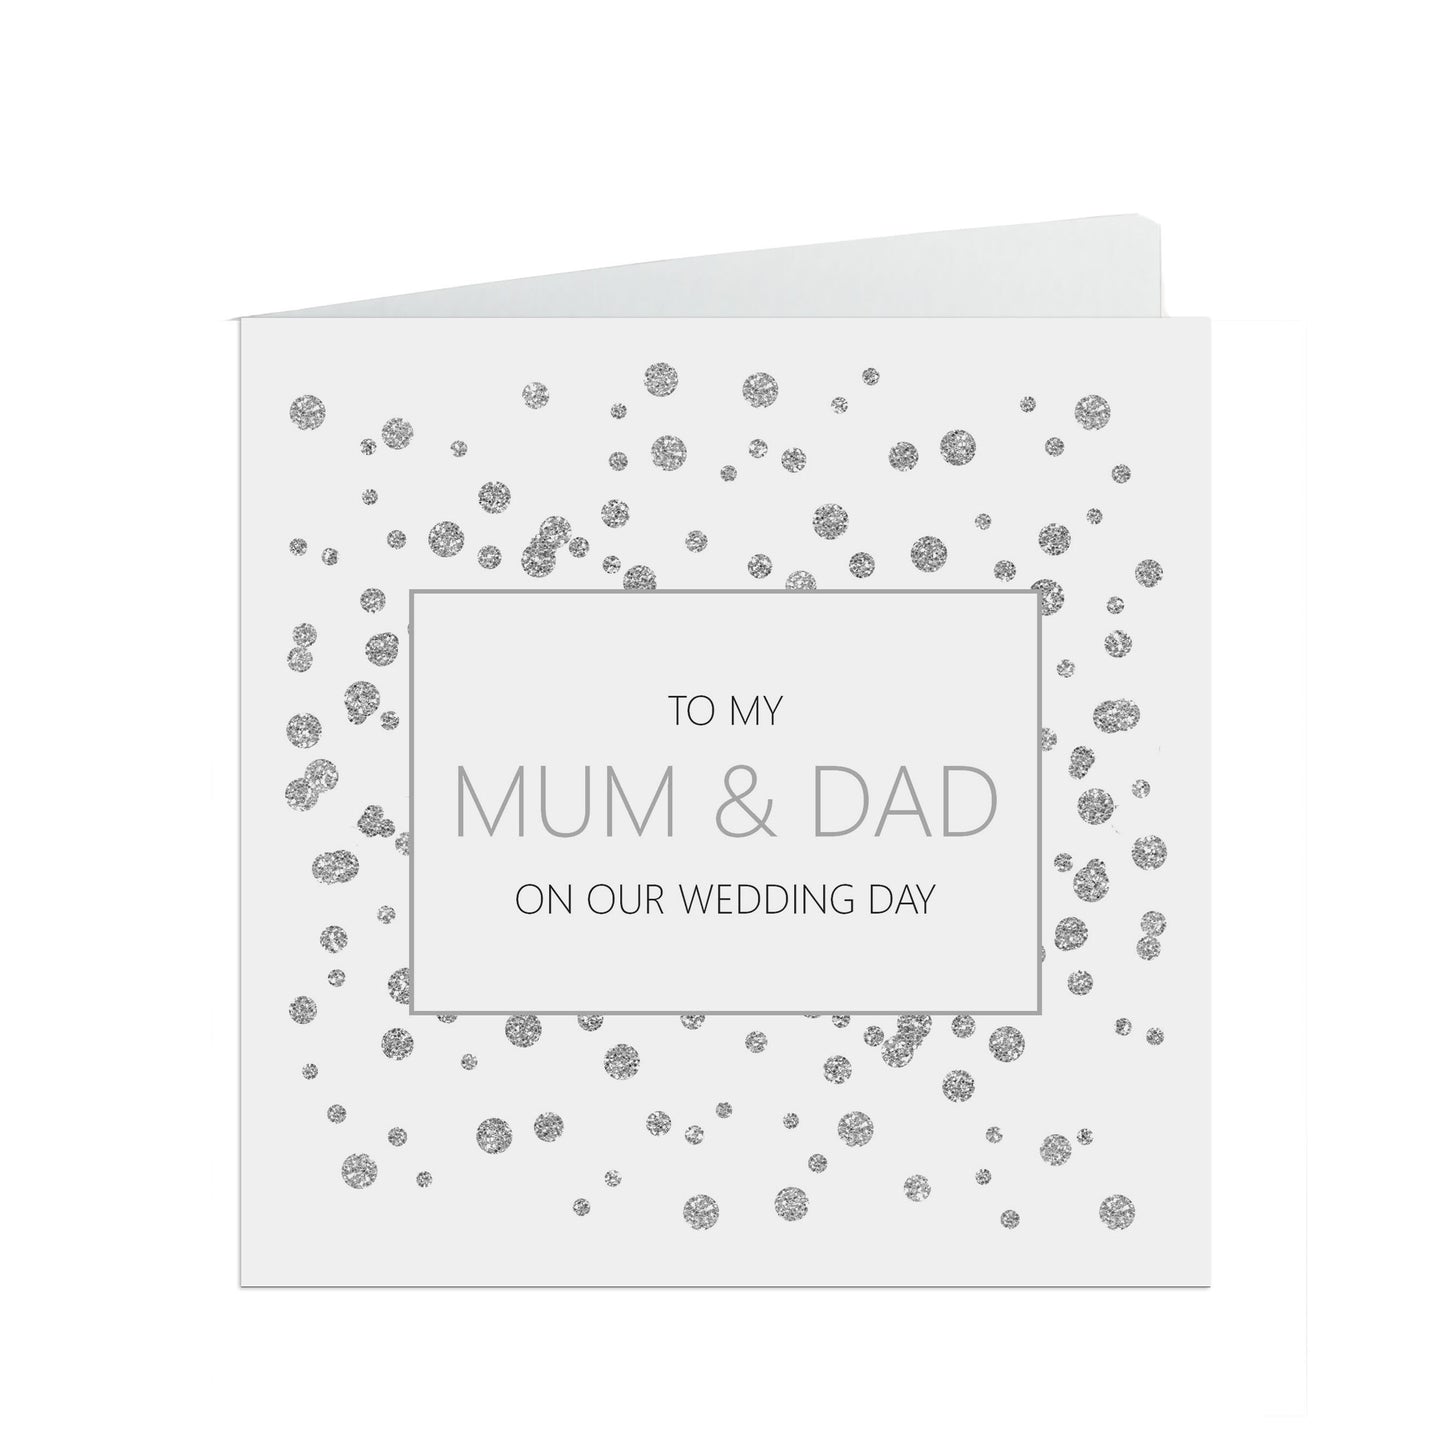 Mum & Dad On Our Wedding Day Card, Silver Effect Inches With A White Envelope